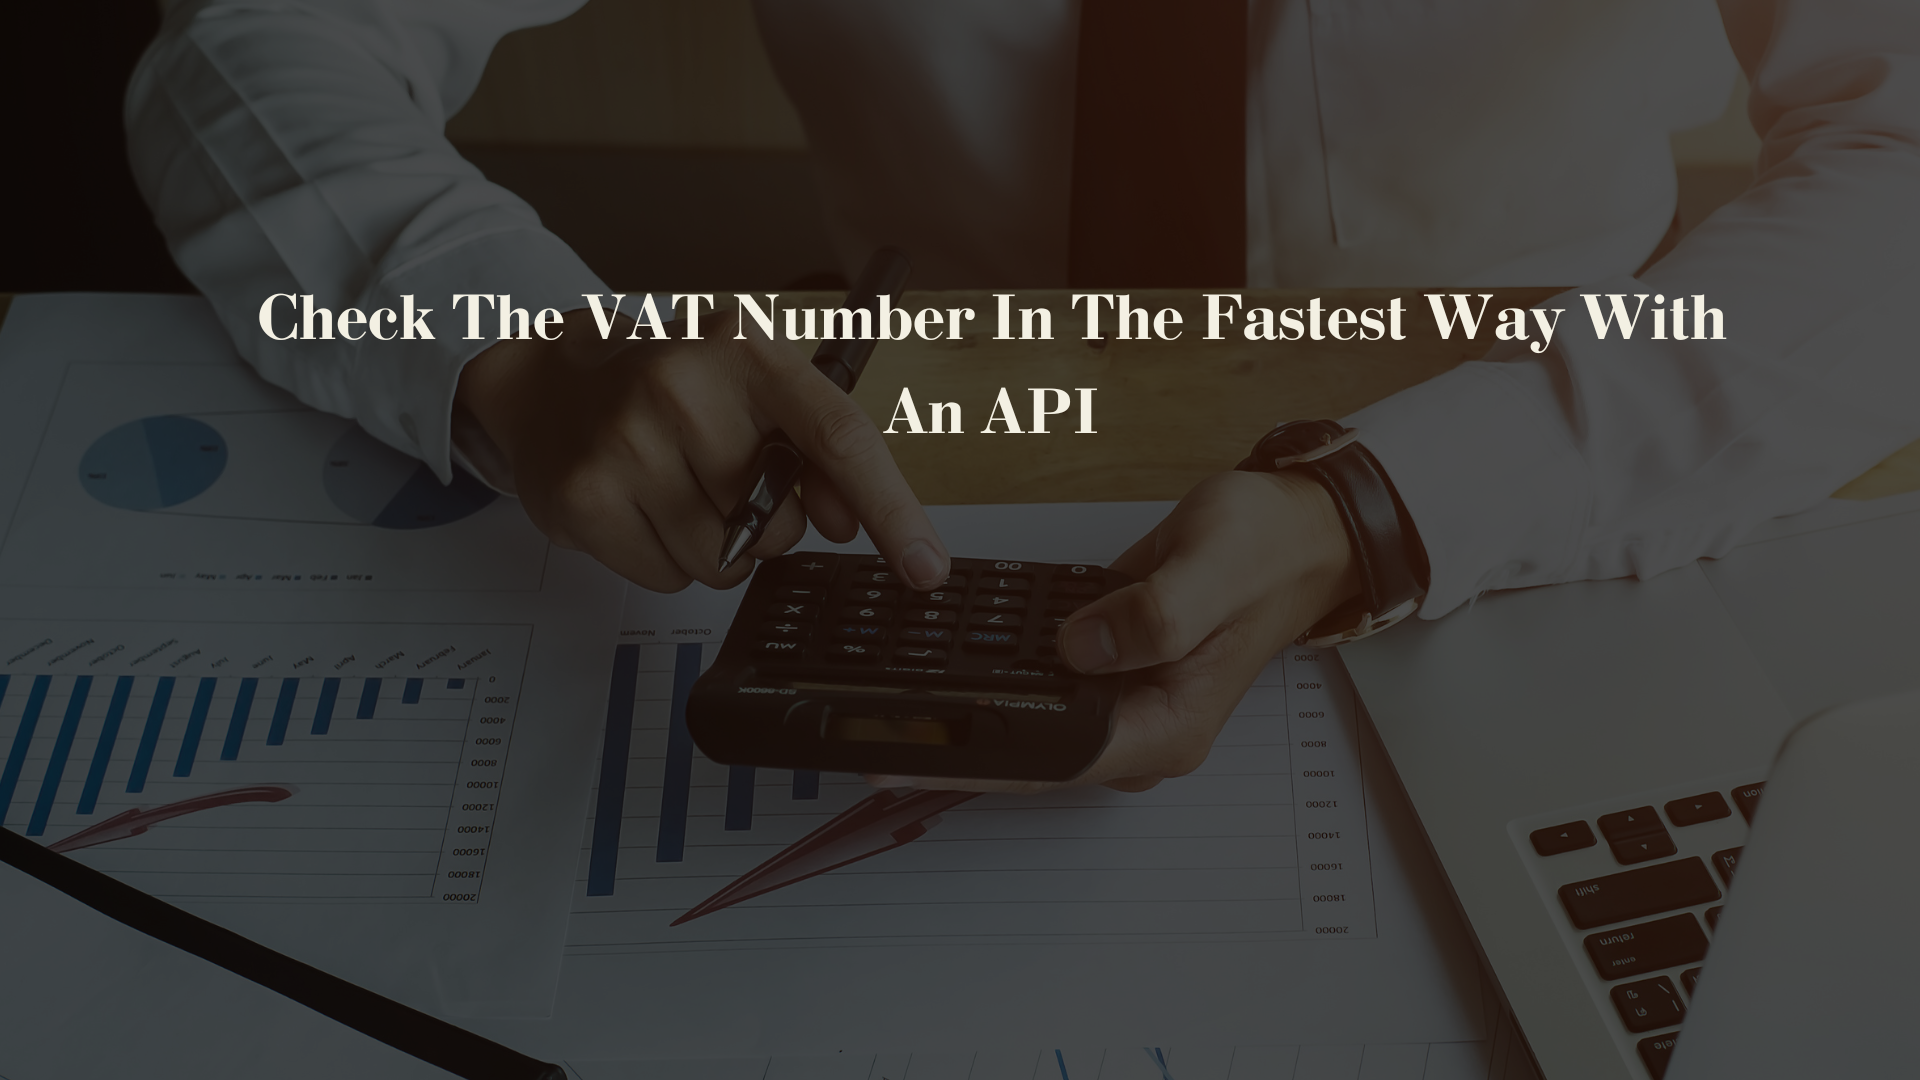 Check The VAT Number In The Fastest Way With An API